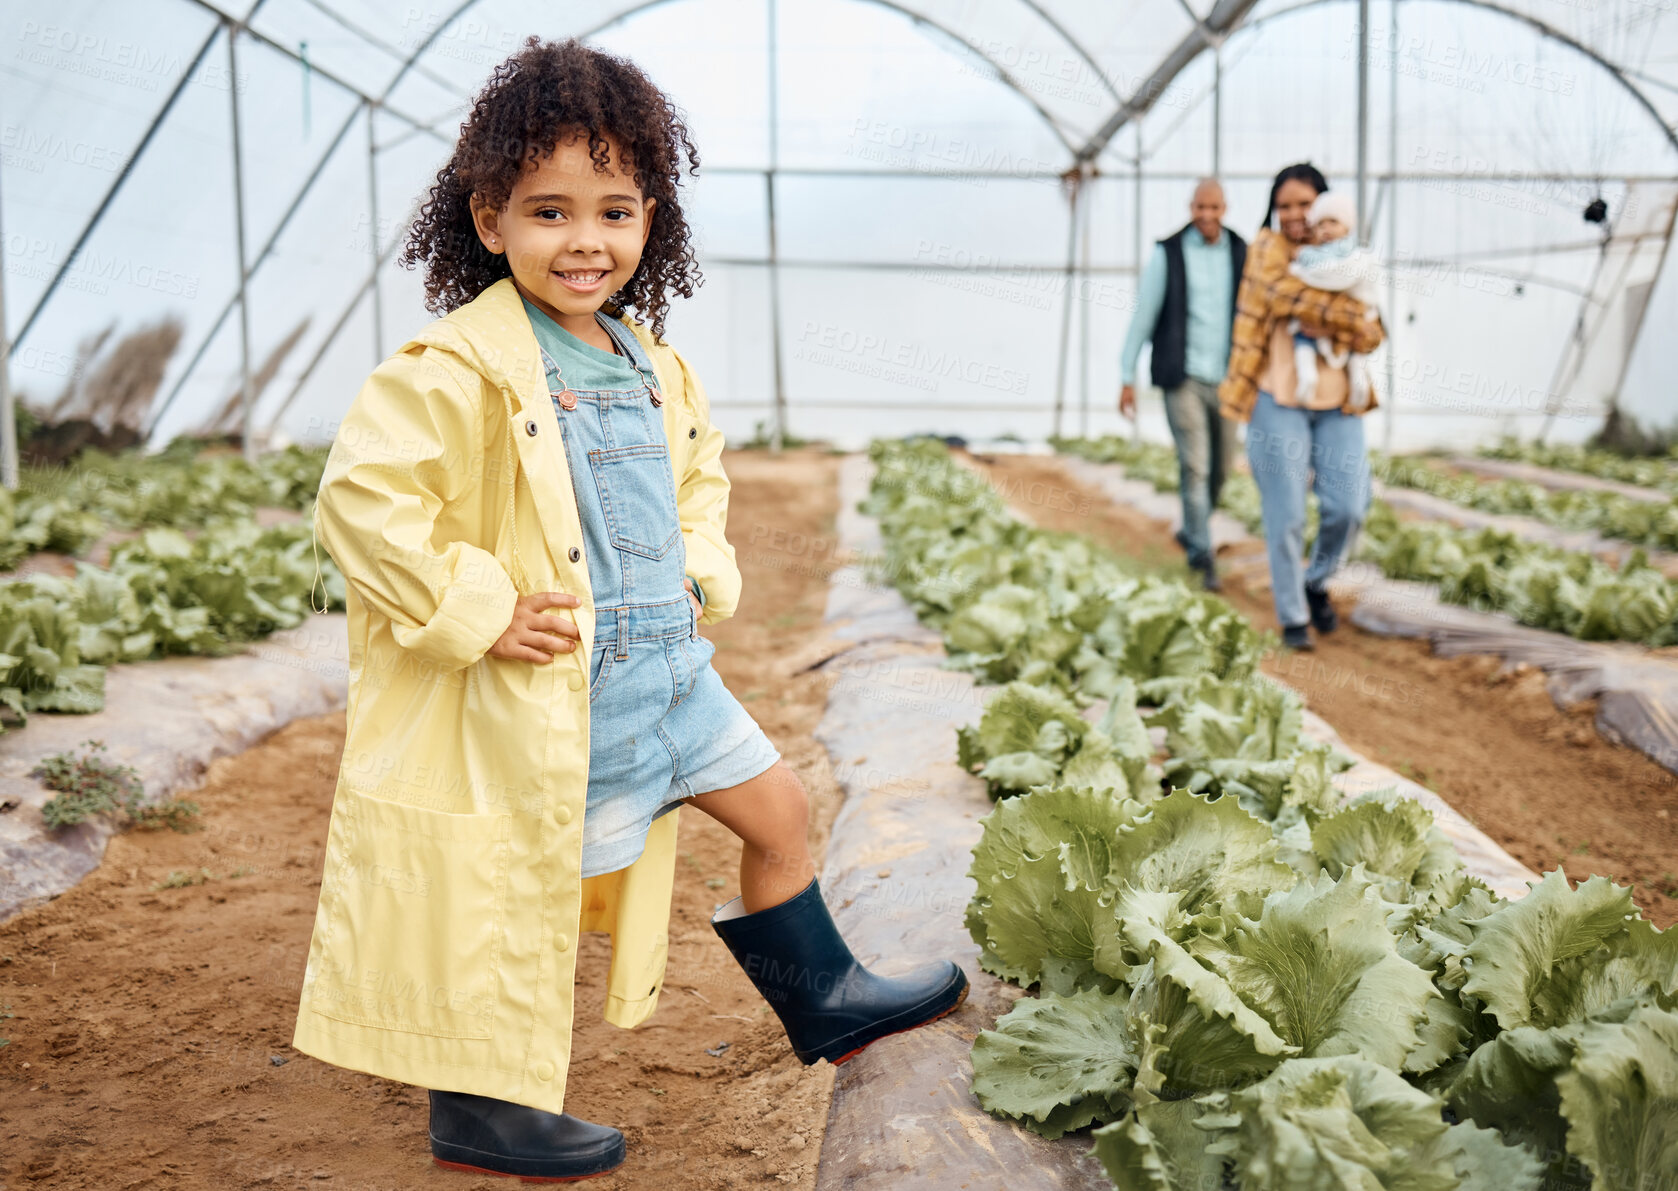 Buy stock photo Kid, happy or girl in farming portrait, akimbo or hands on hips in greenhouse, agriculture land or sustainability field pride. Smile, child or learning gardening in countryside nature or lettuce agro